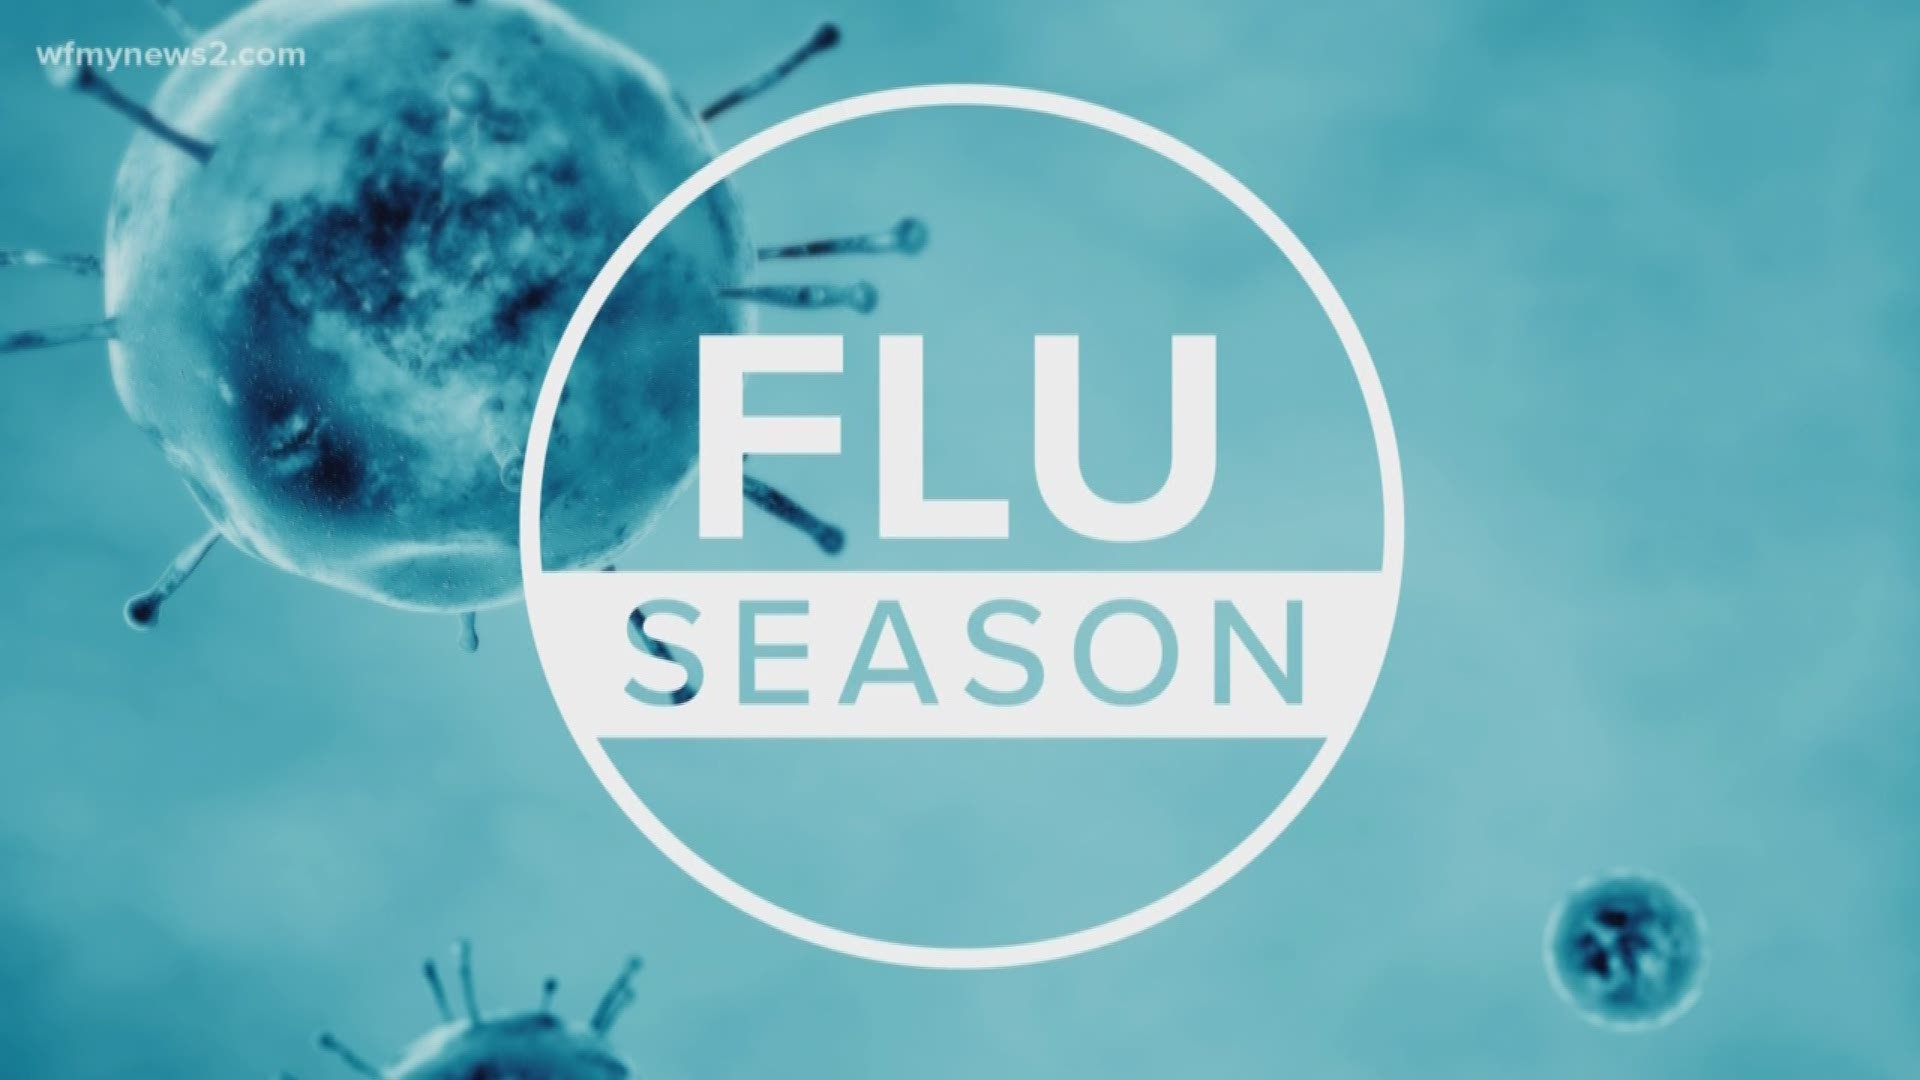 We talk to the experts on how bad they think this flu season will be and when is the best time to get a flu shot.